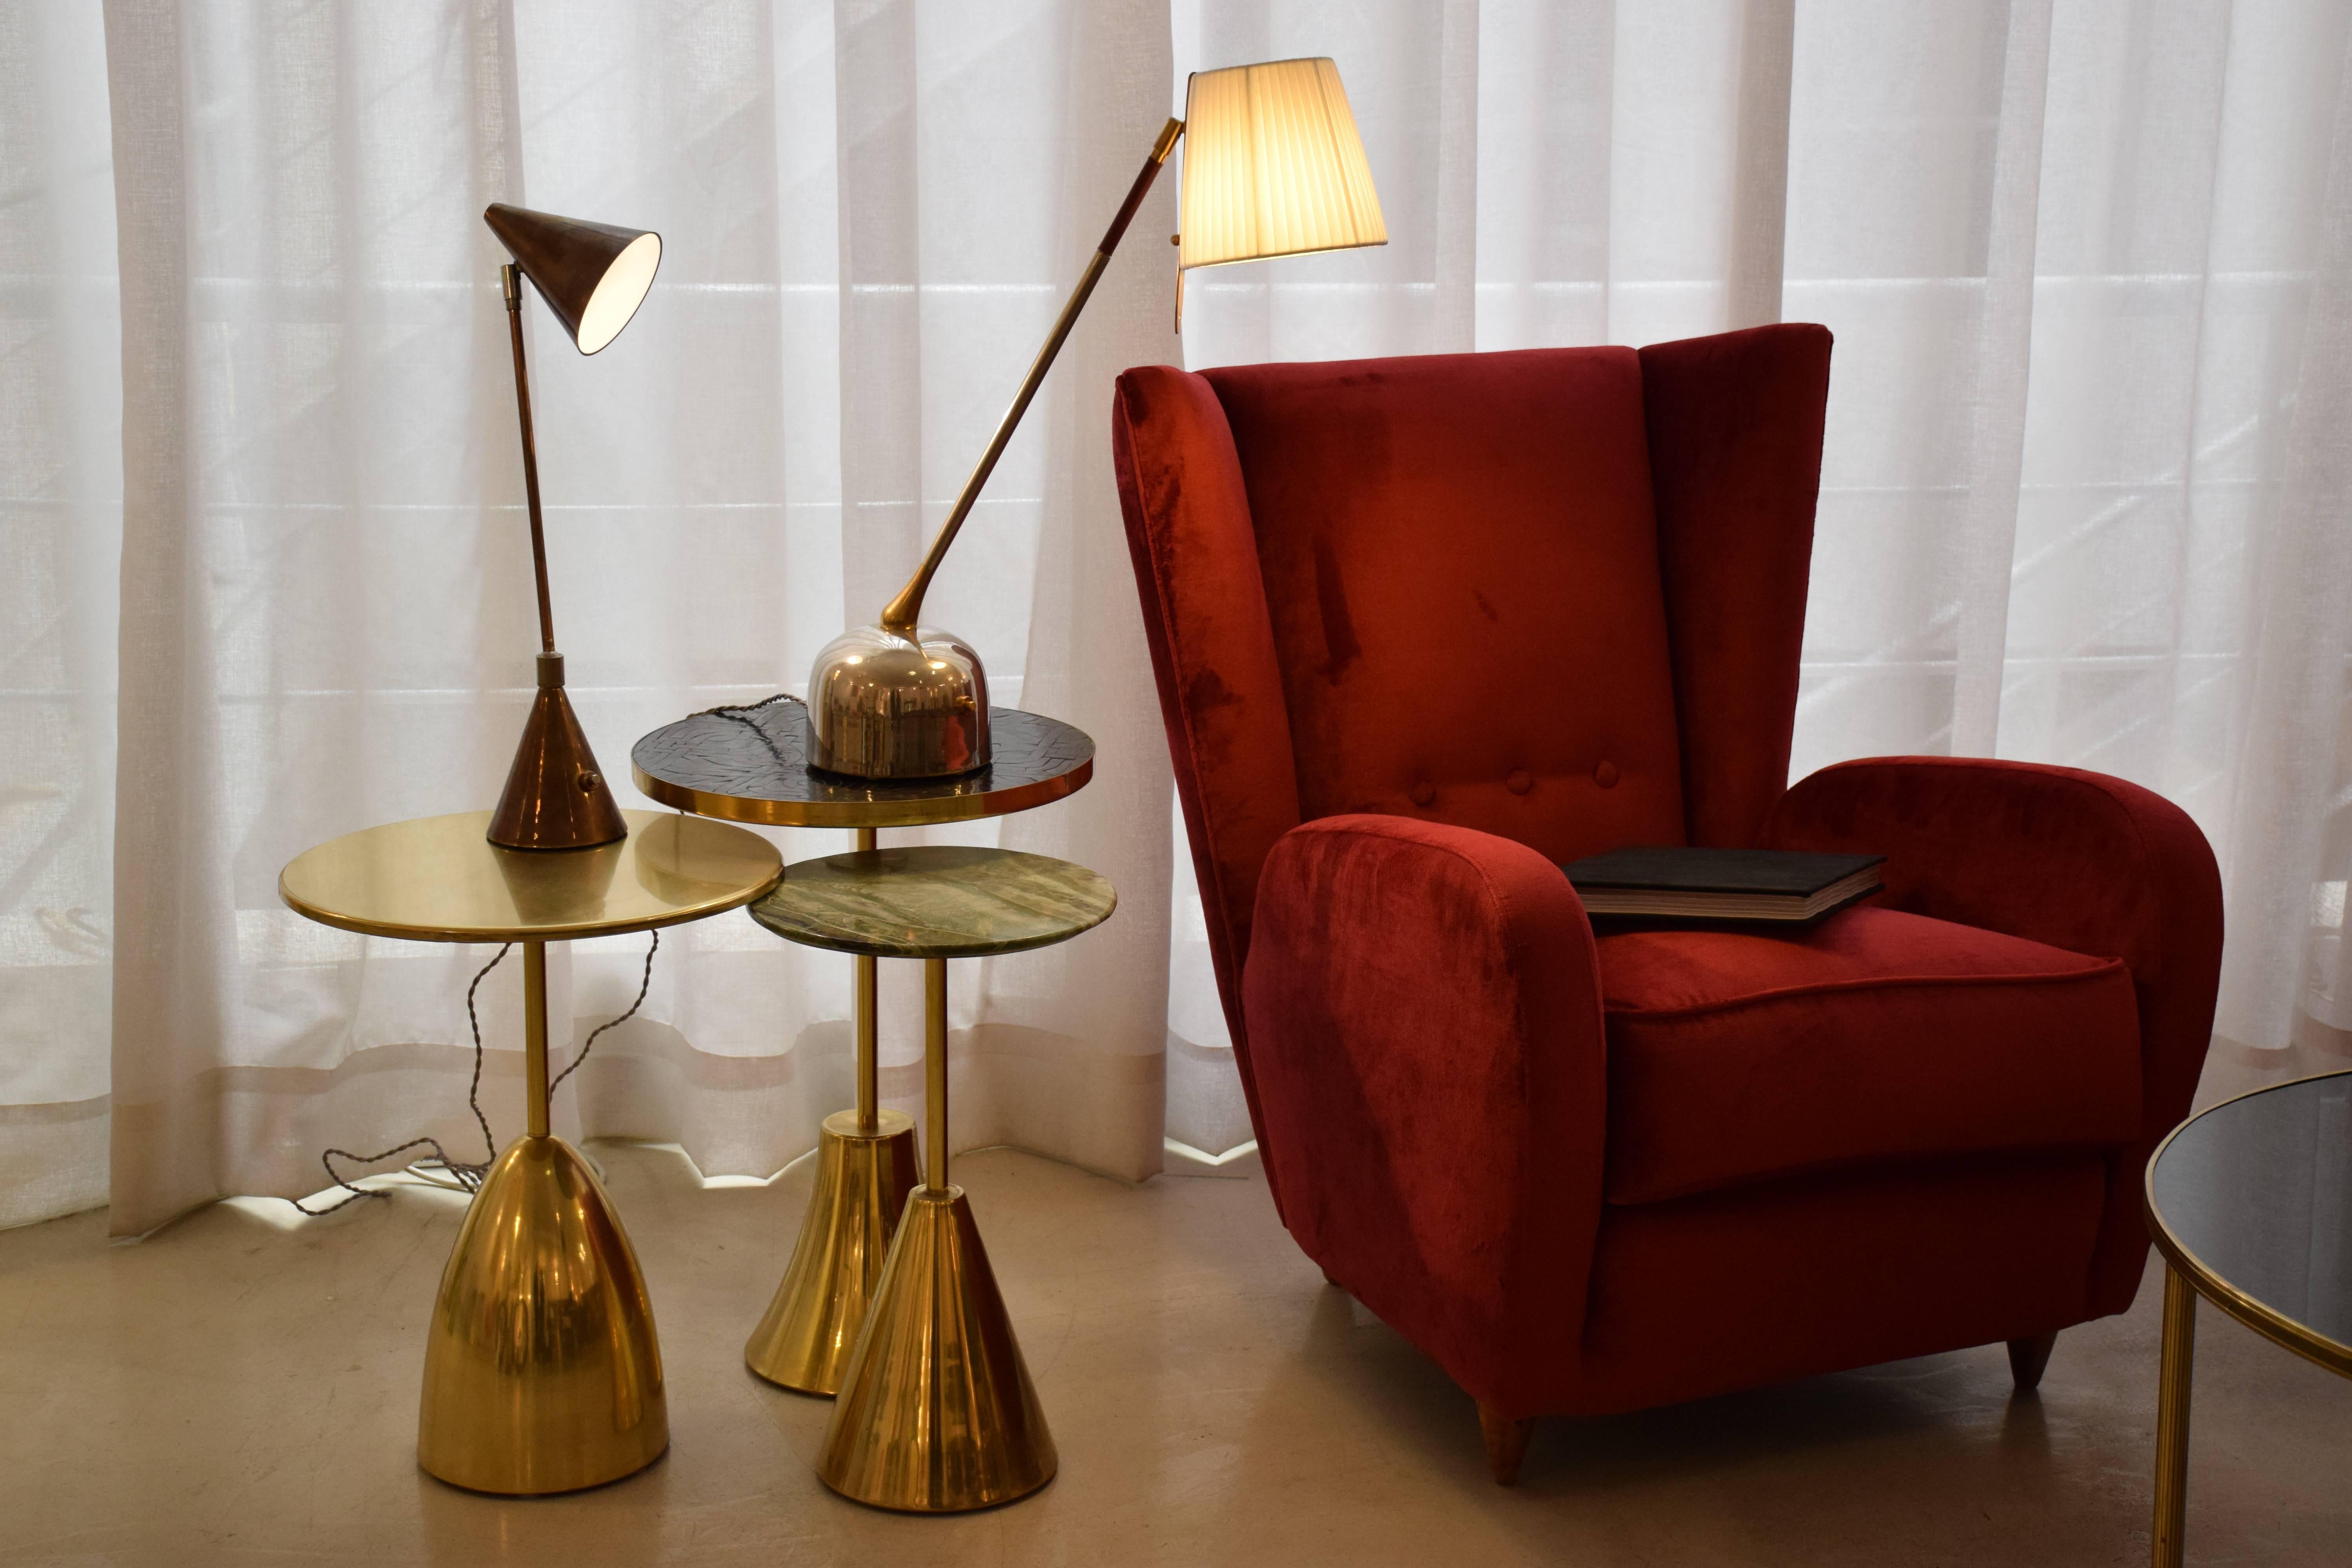 Evolution-I Contemporary Brass Table Lamp, Flow Collection 4